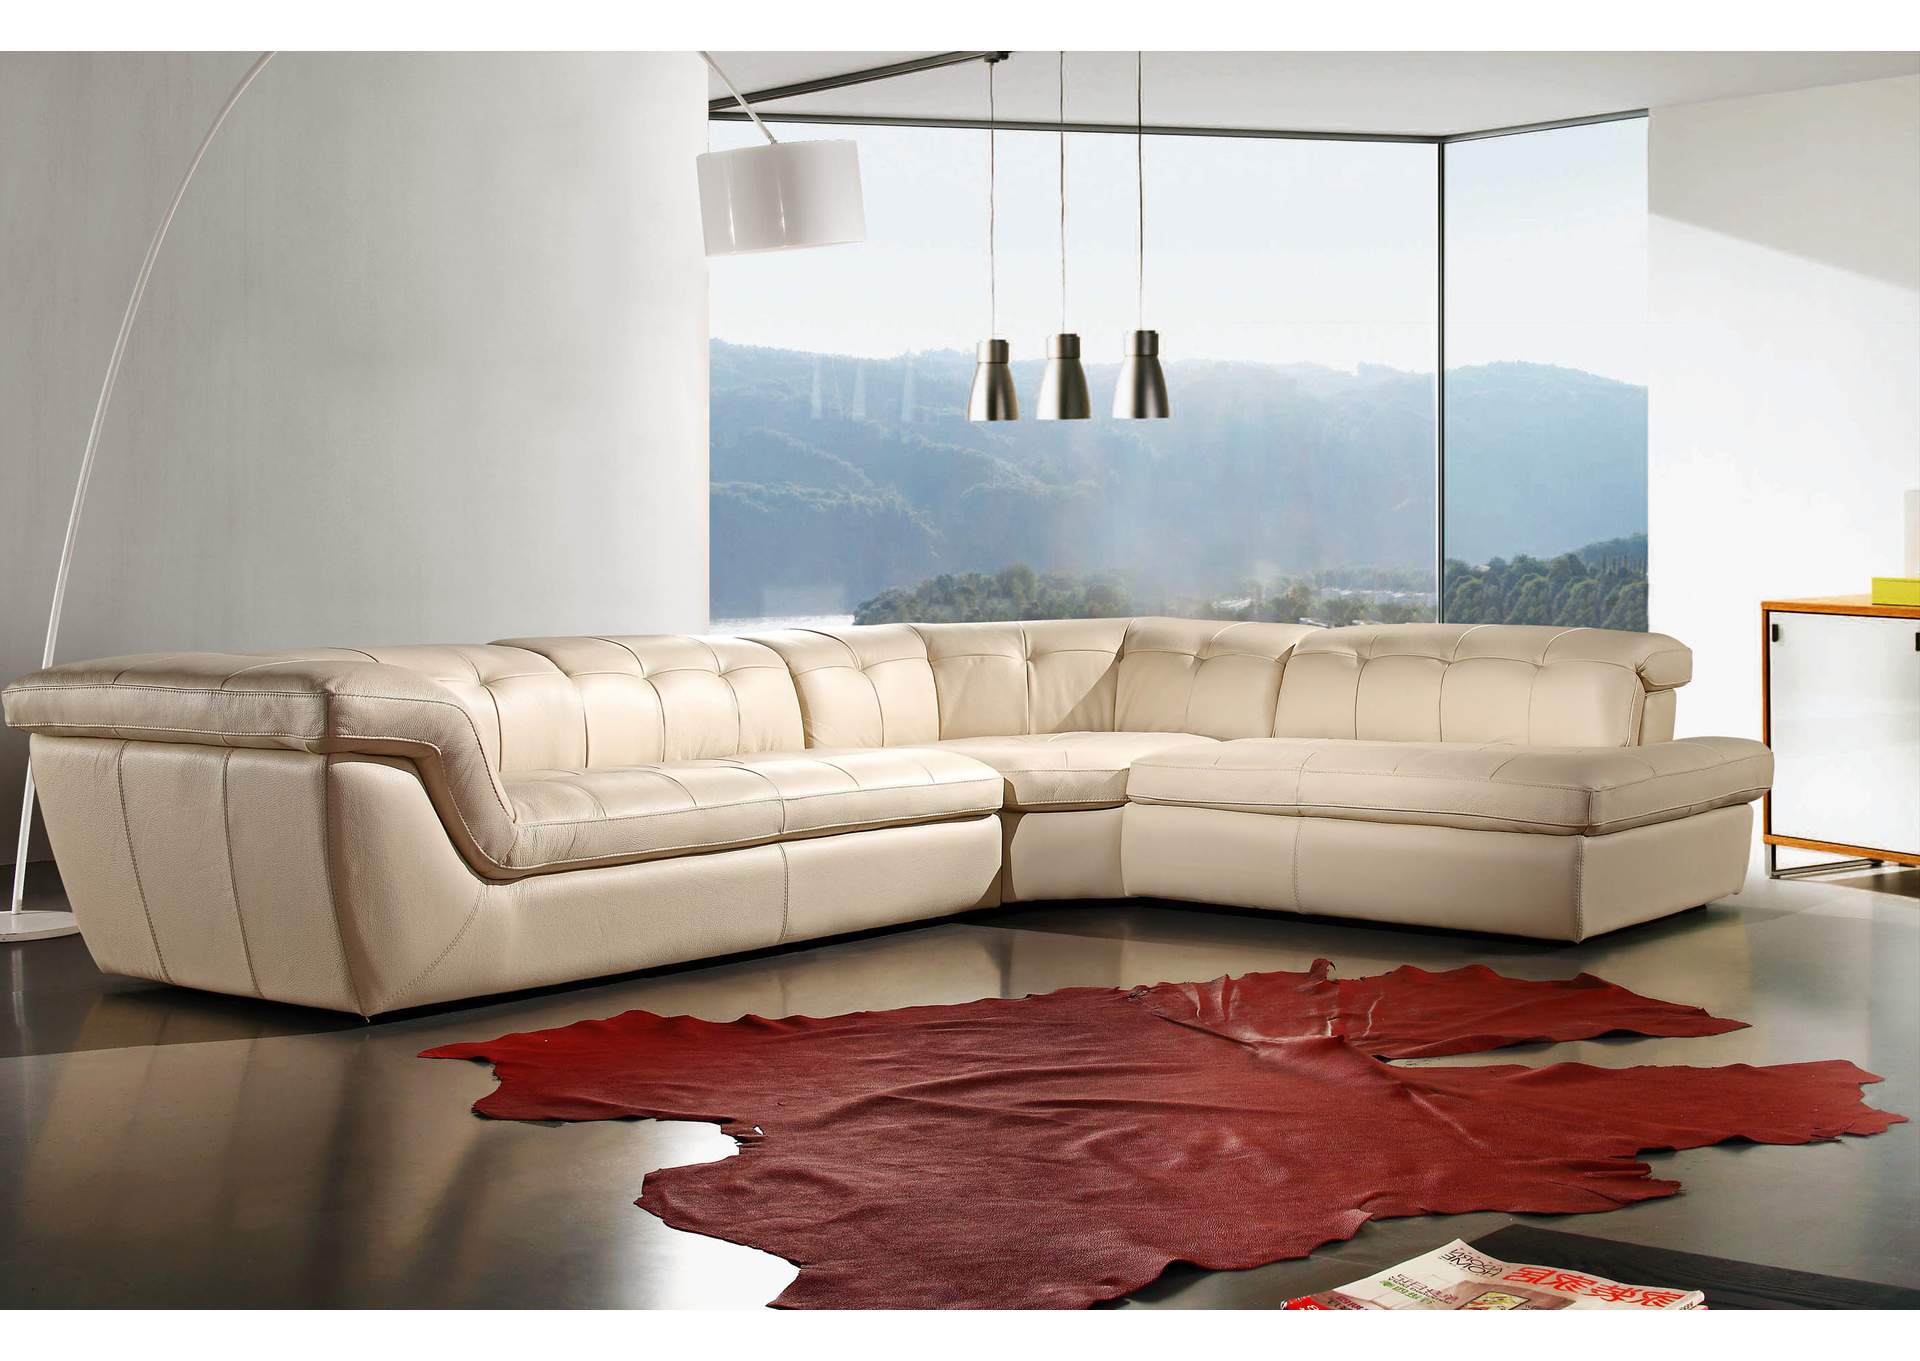 397 Italian Leather Sectional Beige Color Right Hand Facing,J&M Furniture